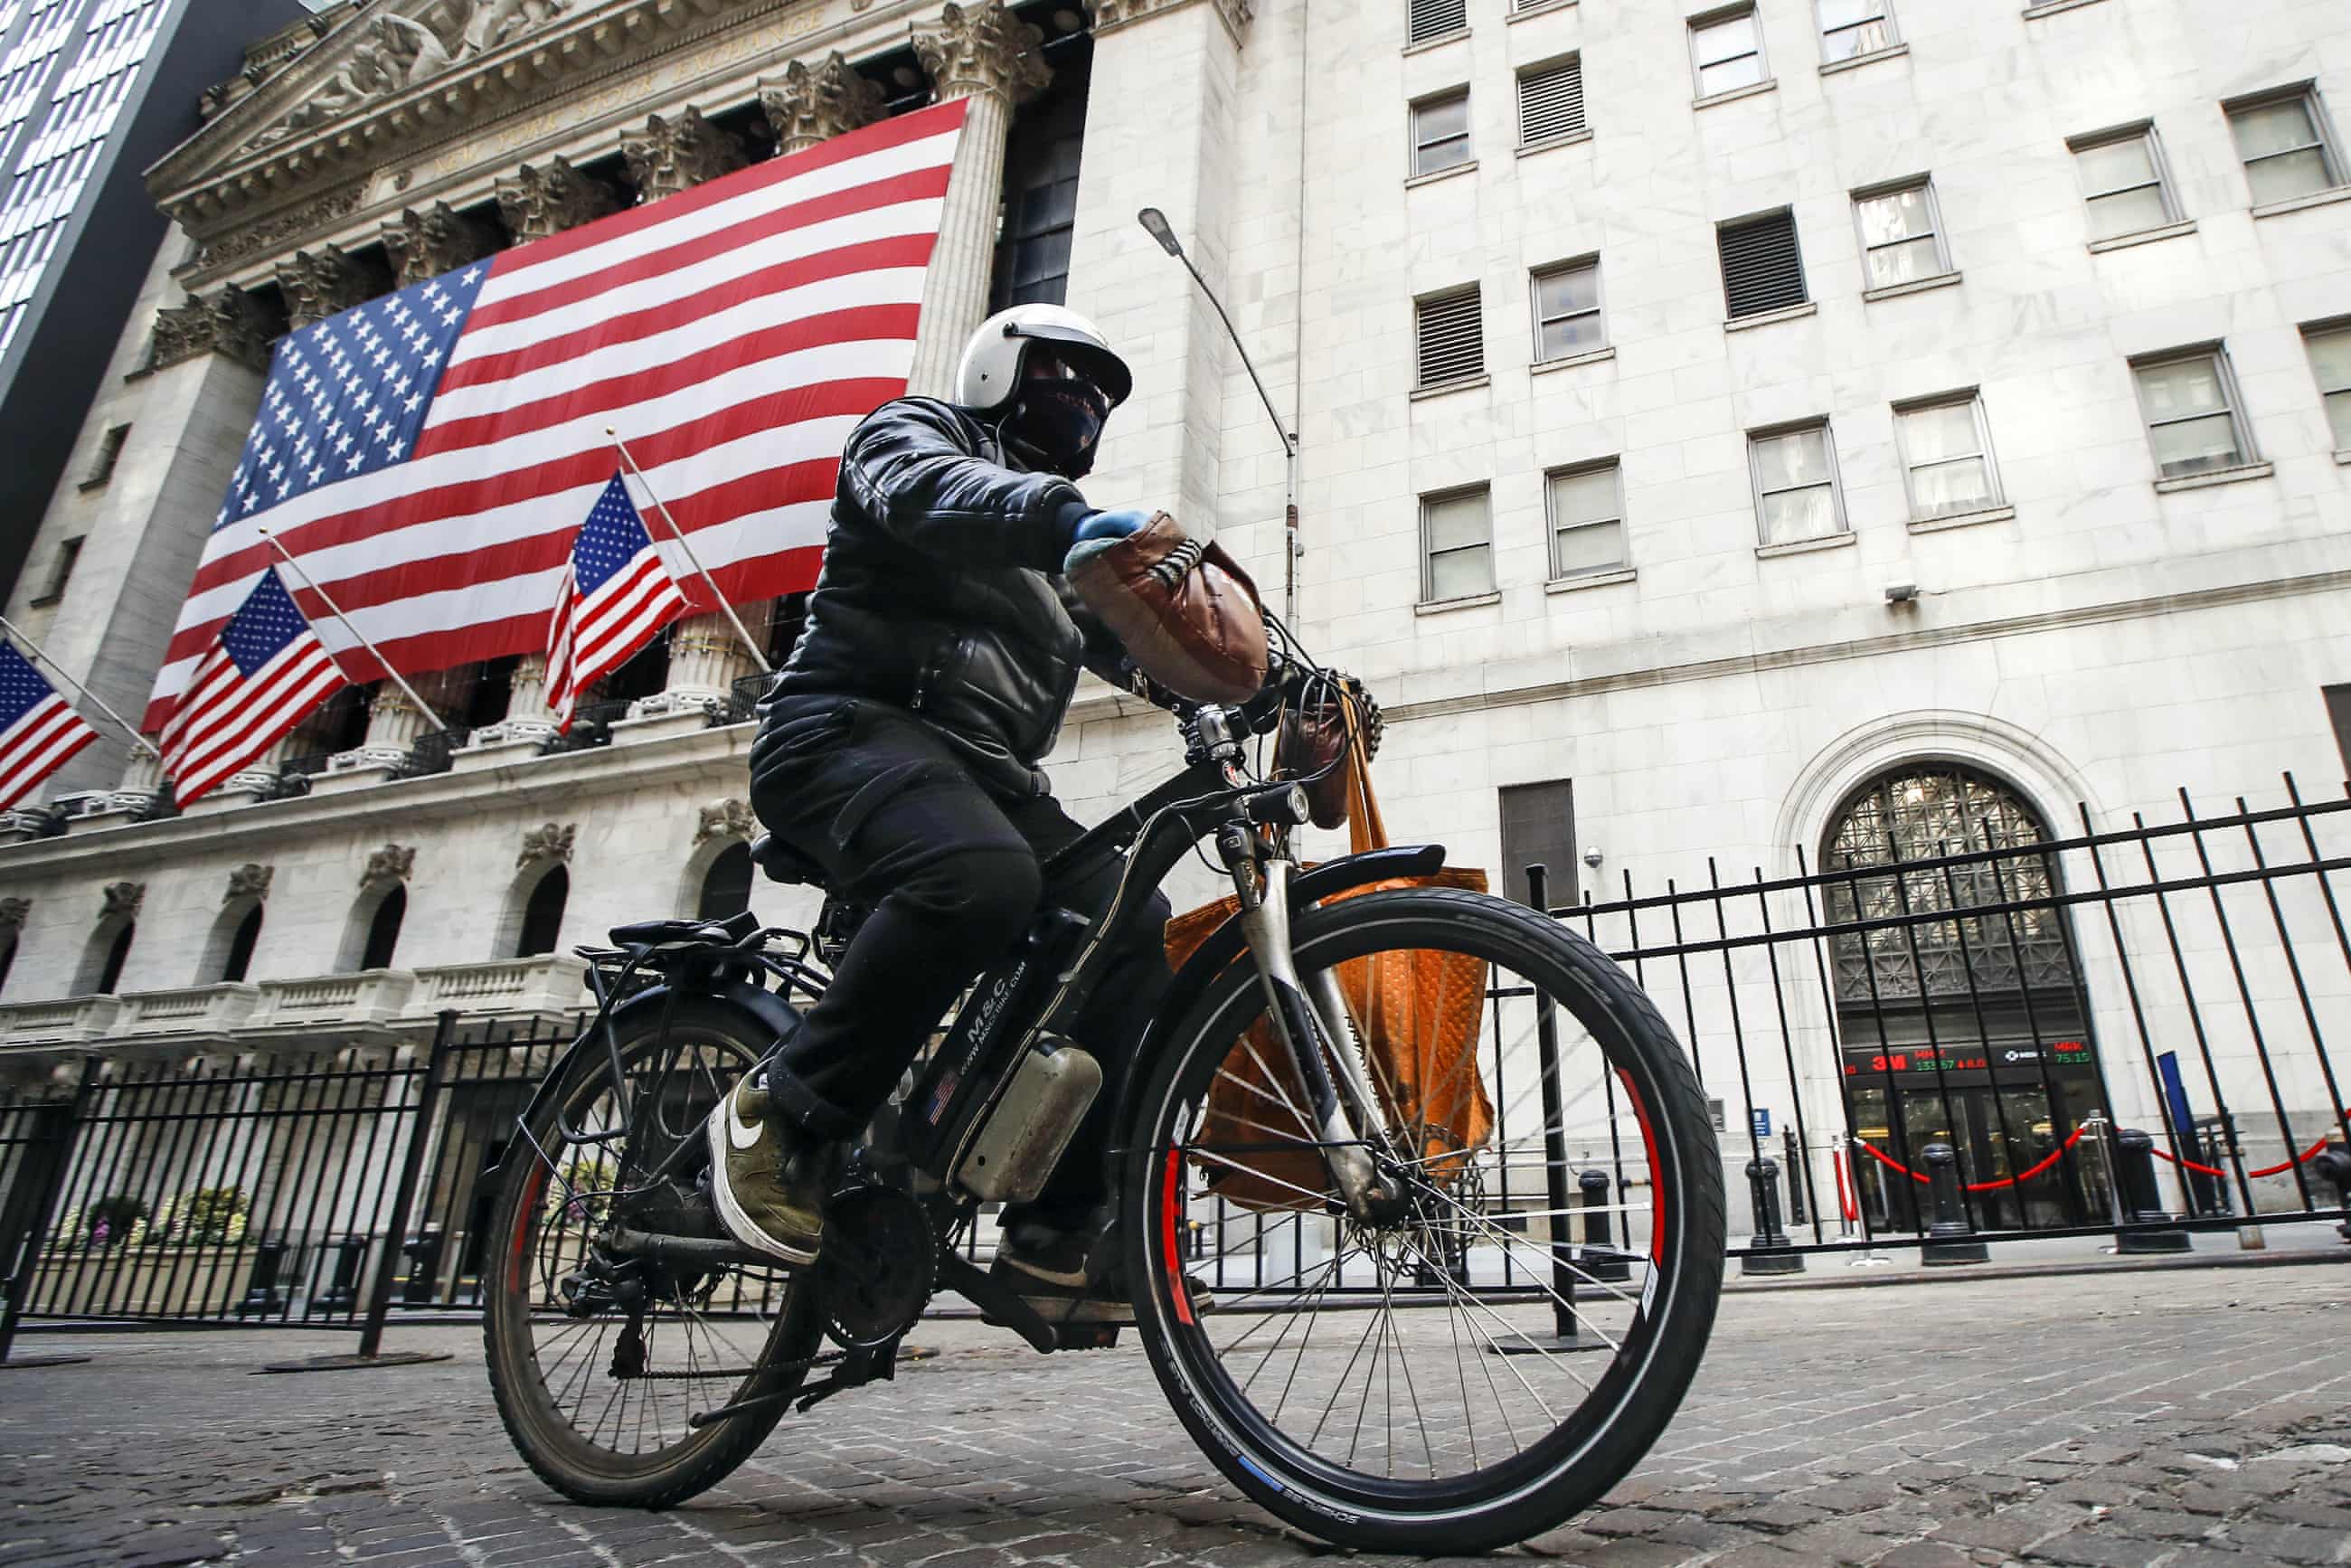 E-bike batteries have caused 200 fires in New York: ‘Everyone’s scared’ (theguardian.com)